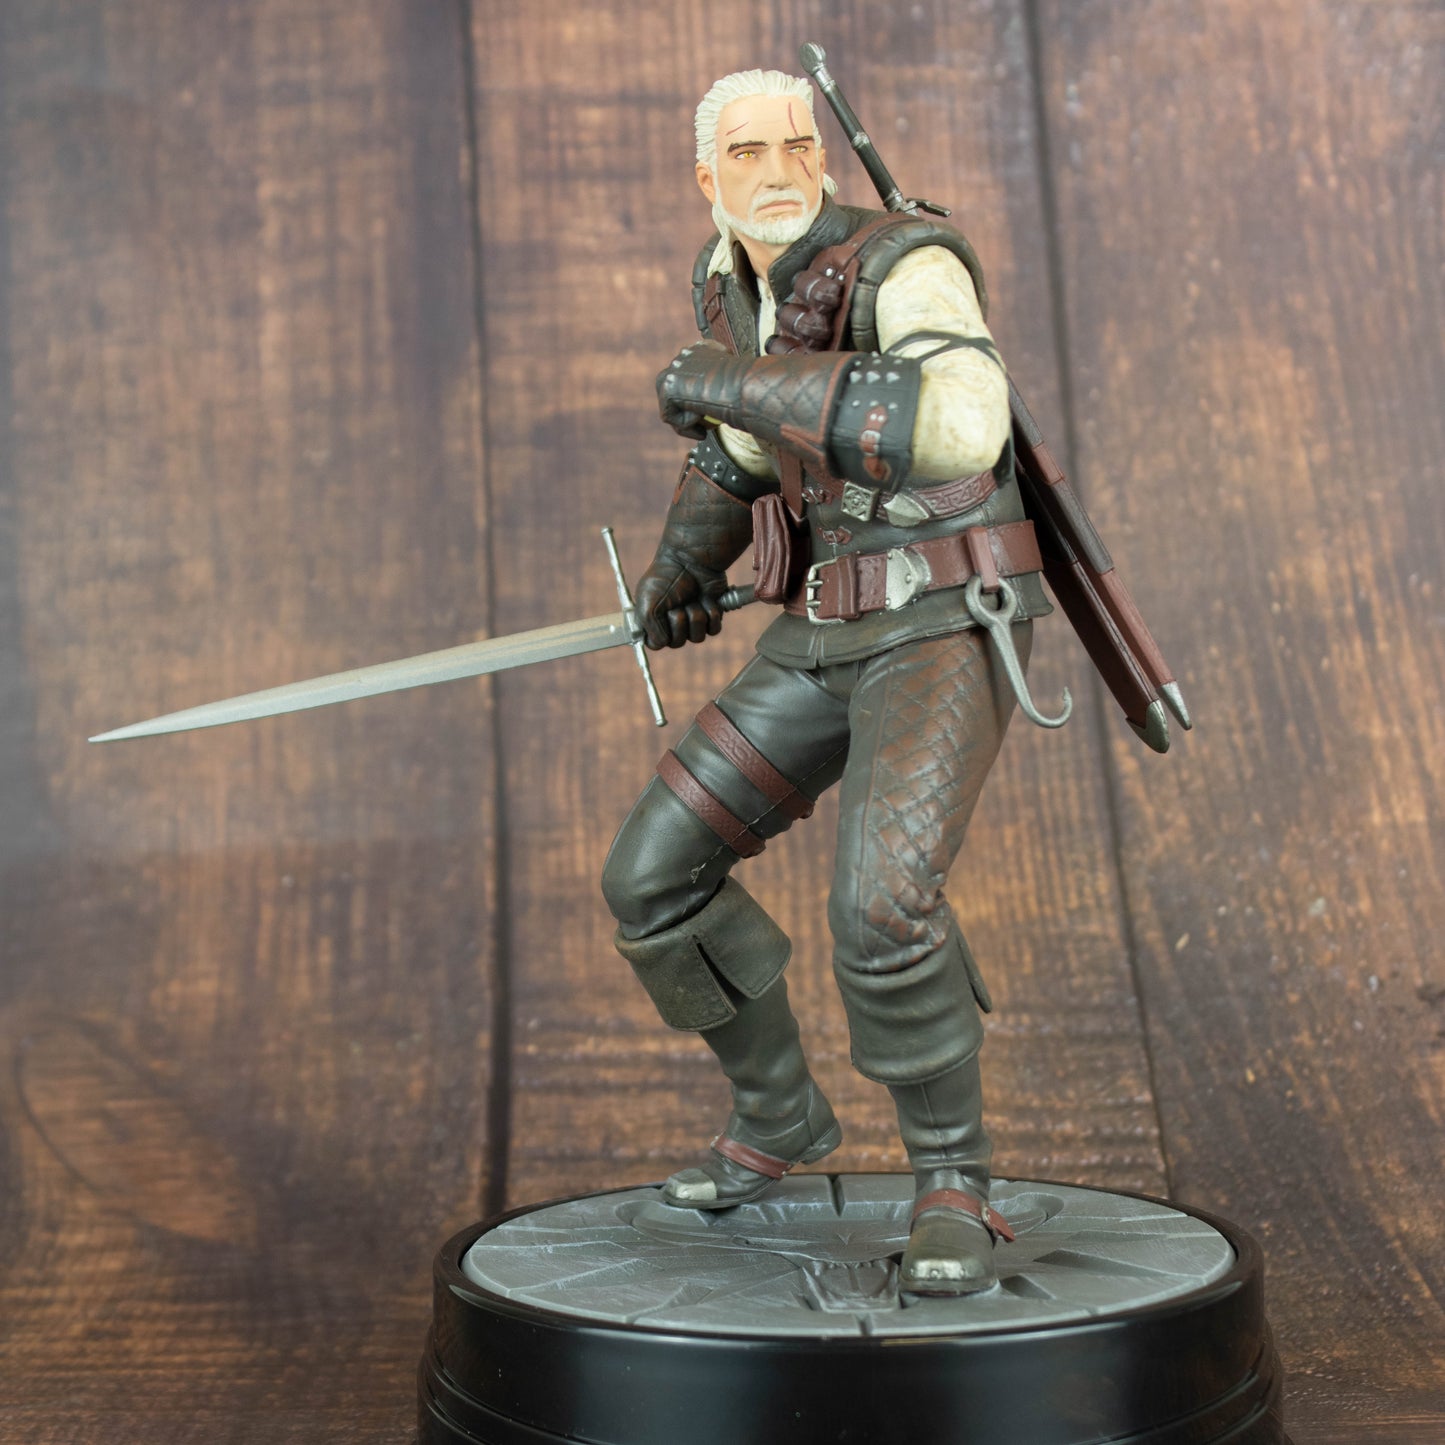 Geralt of Rivia (Manticore Armor) The Witcher: Wild Hunt Statue